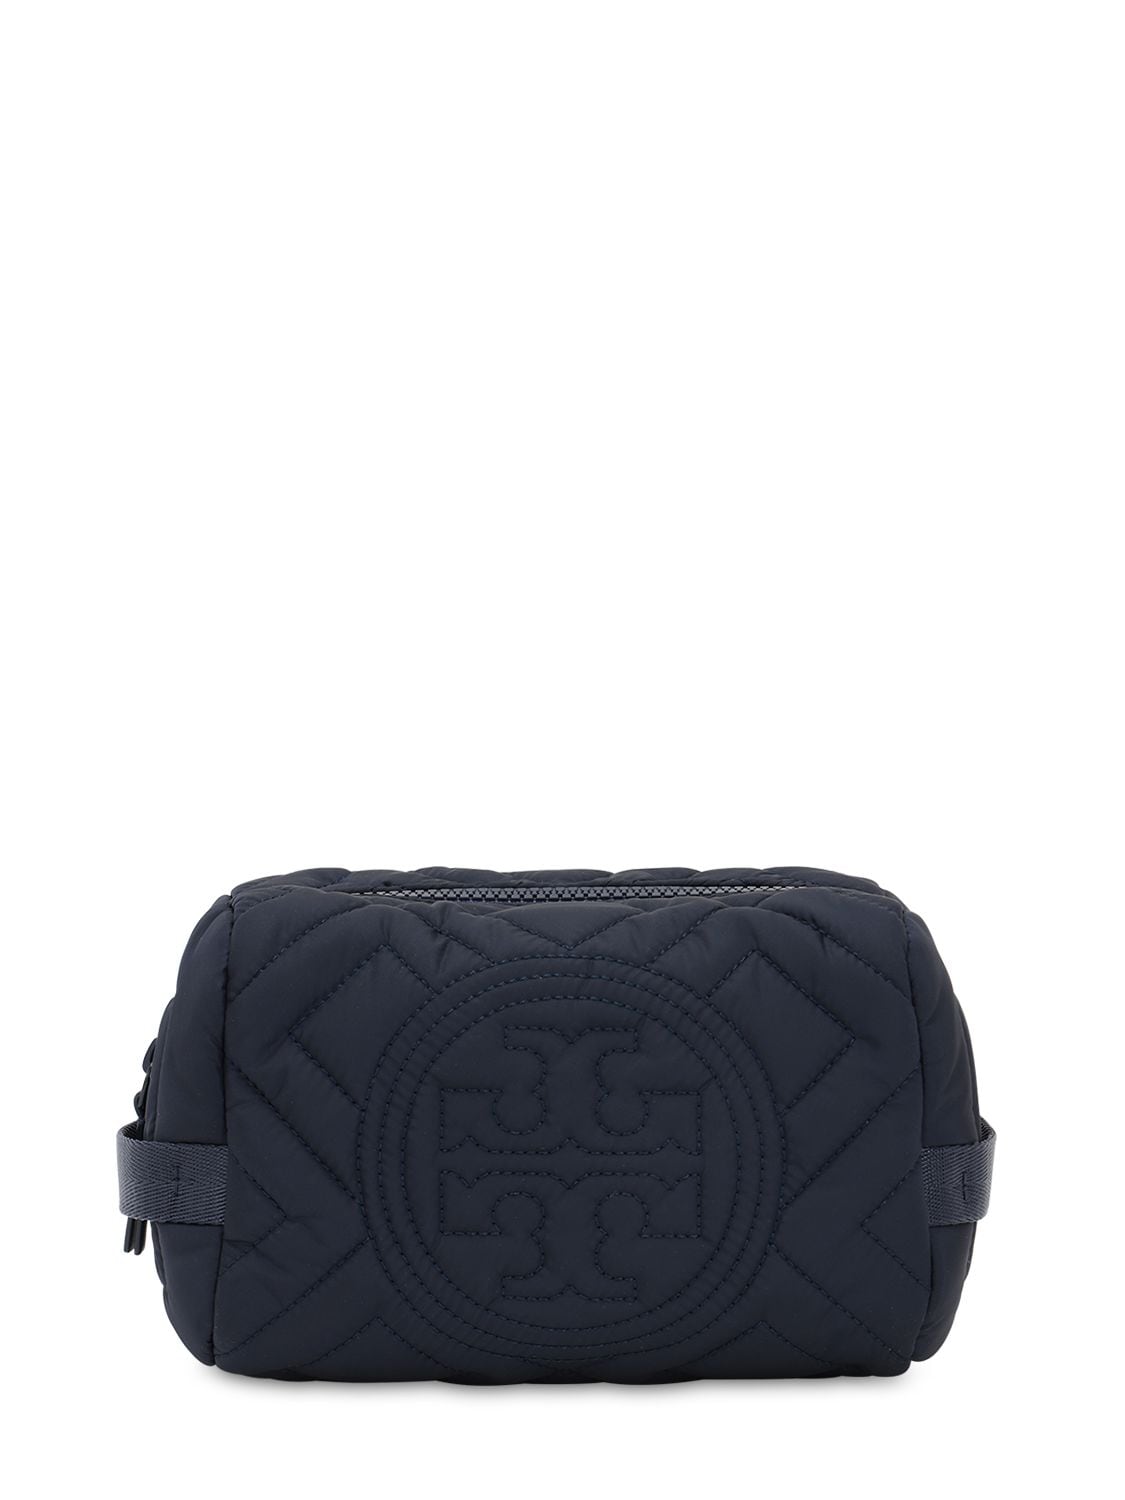 TORY BURCH QUILTED NYLON COSMETIC CASE,70IL4W045-NDAZ0